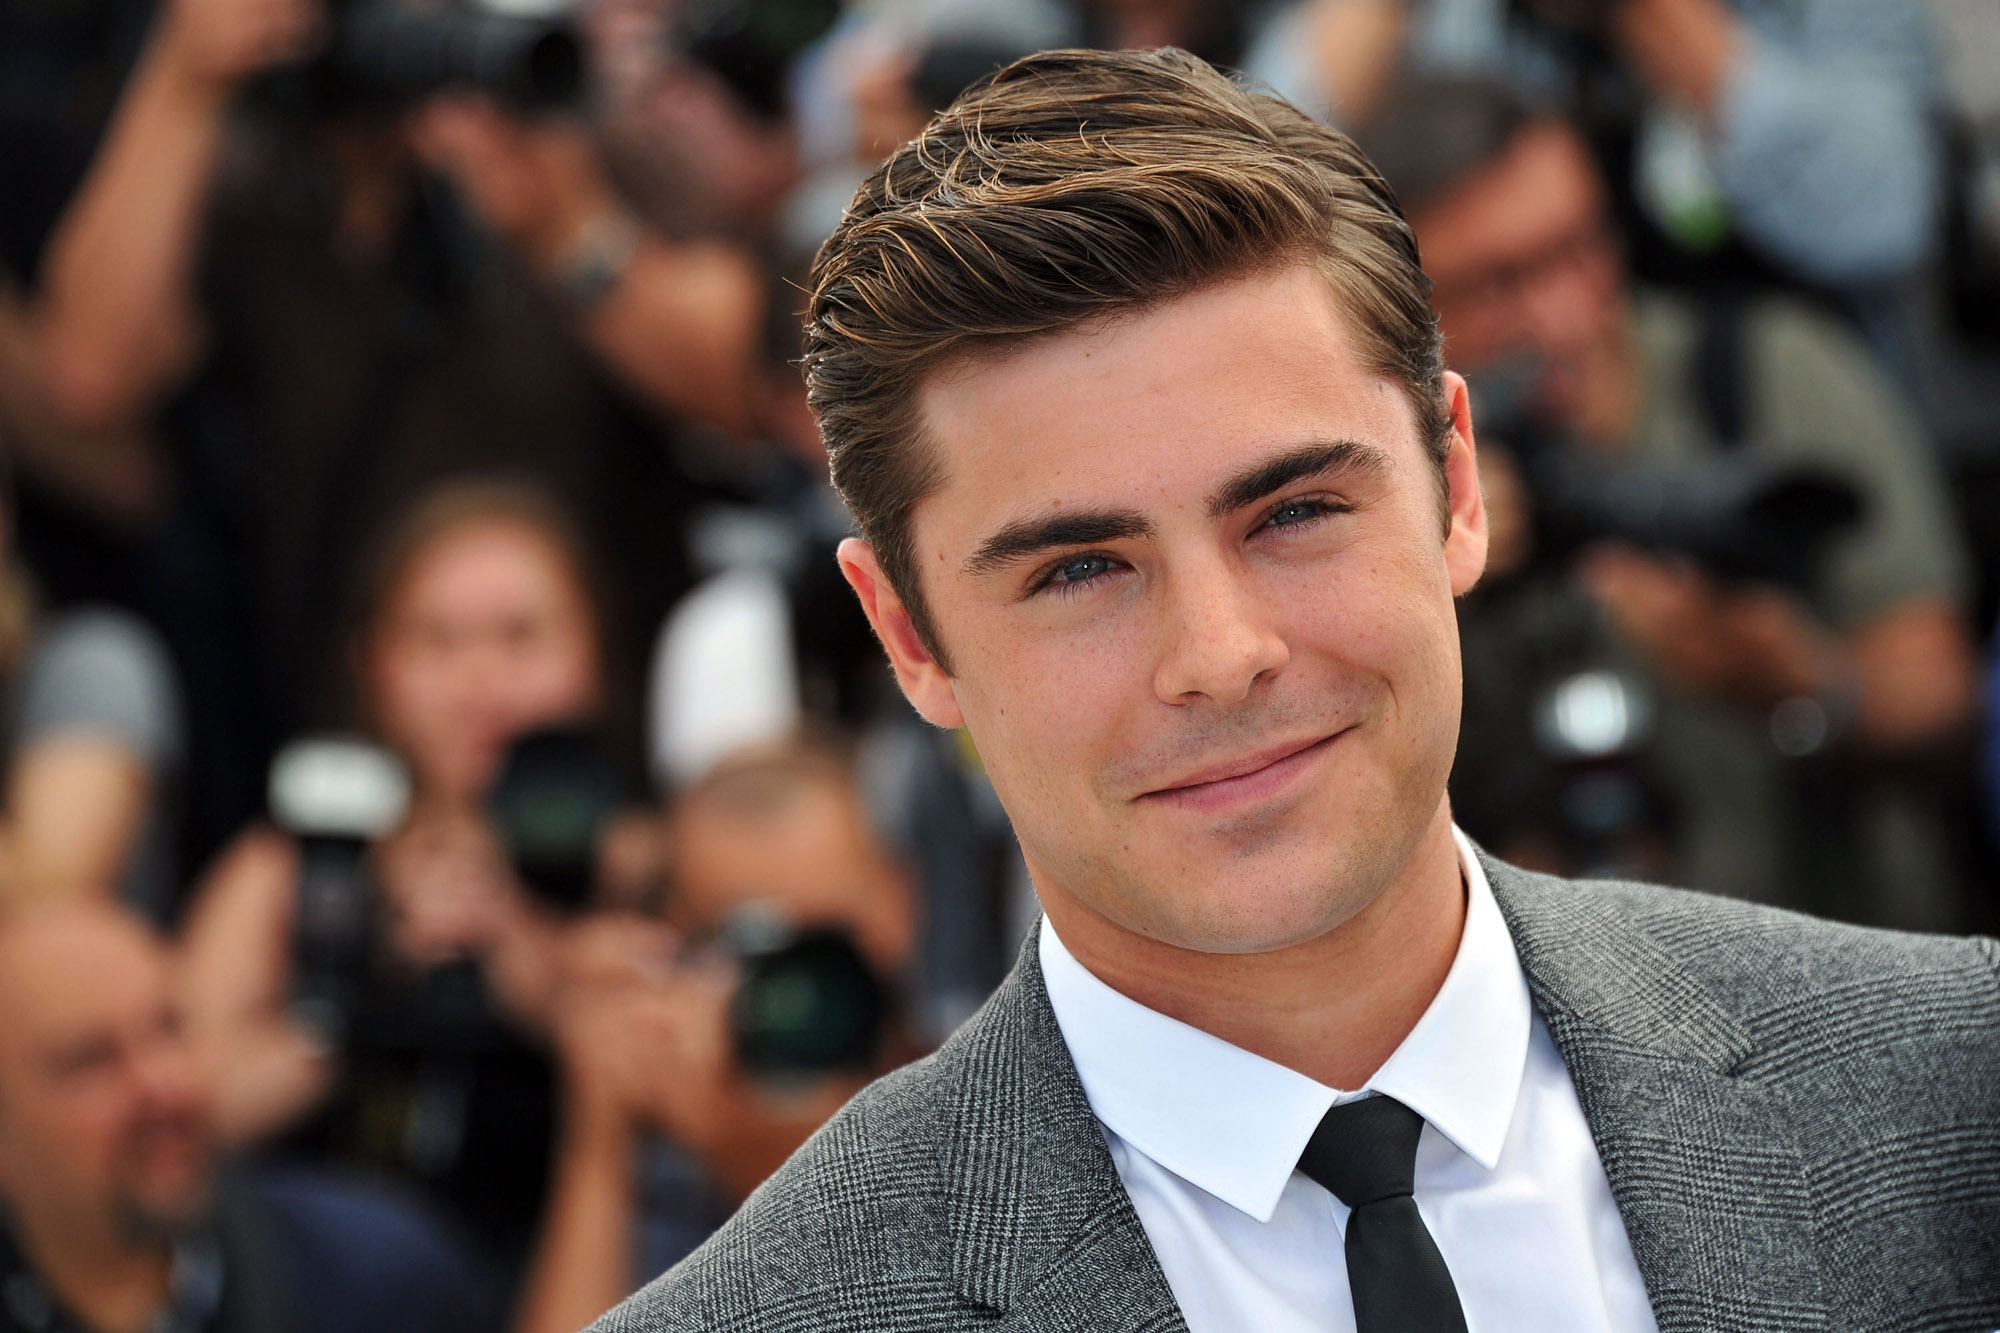 FILE - SEPTEMBER 17: Actor Zac Efron completed a stay in rehab five months ago. CANNES, FRANCE - MAY 24: Actor Zac Efron attends the "The Paperboy" photocall during the 65th Annual Cannes Film Festival at Palais des Festivals on May 24, 2012 in Cannes, France. (Photo by Pascal Le Segretain/Getty Images)